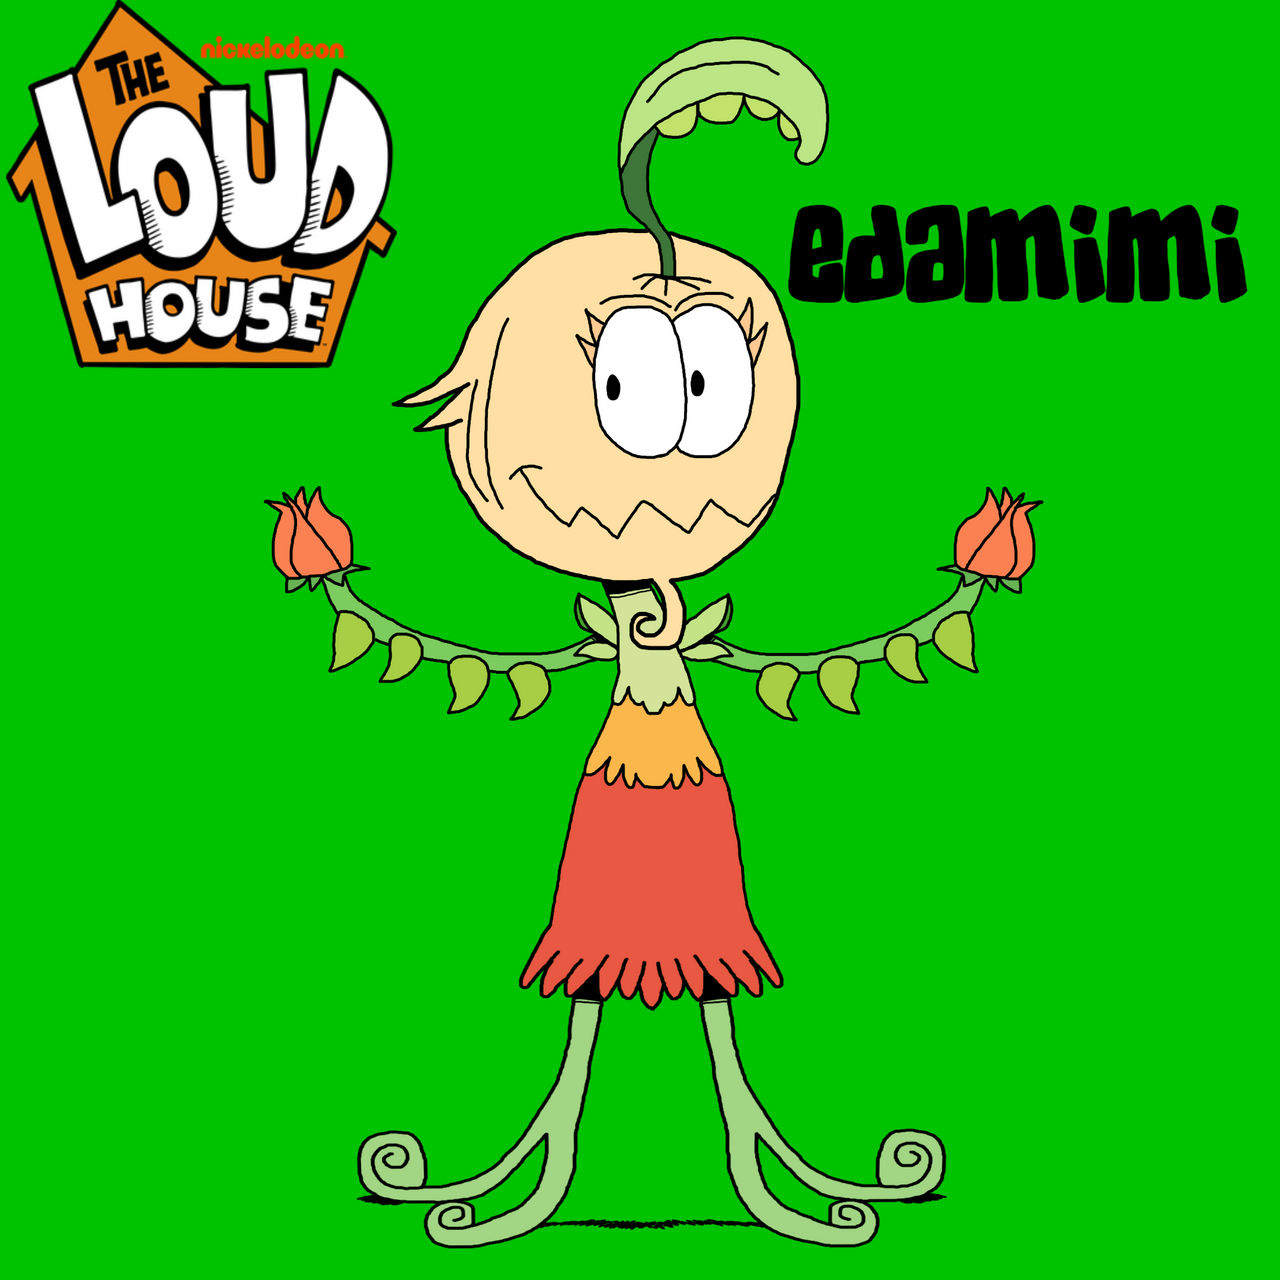 The Loud House' Style: Epic Wubbox (Cold) by josias0303 on DeviantArt